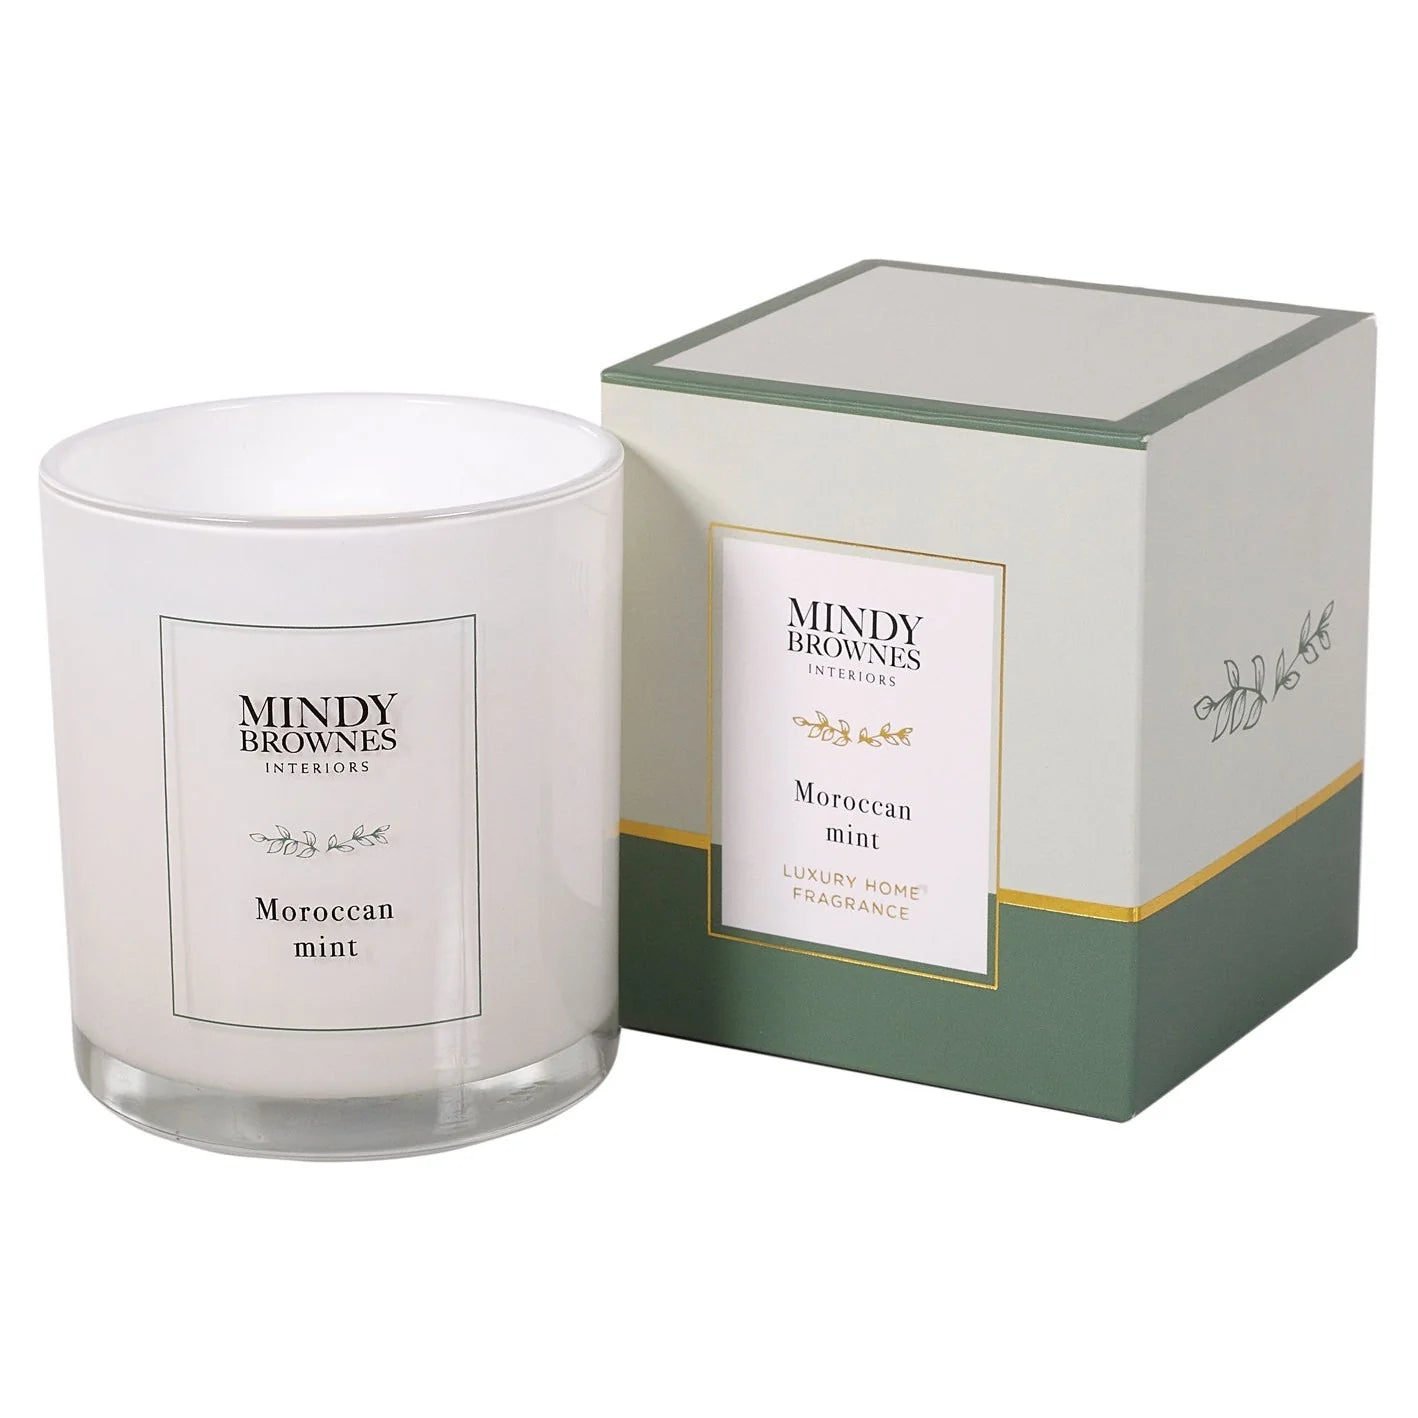 Mindy Brownes Scented Candles - Moroccan Mint